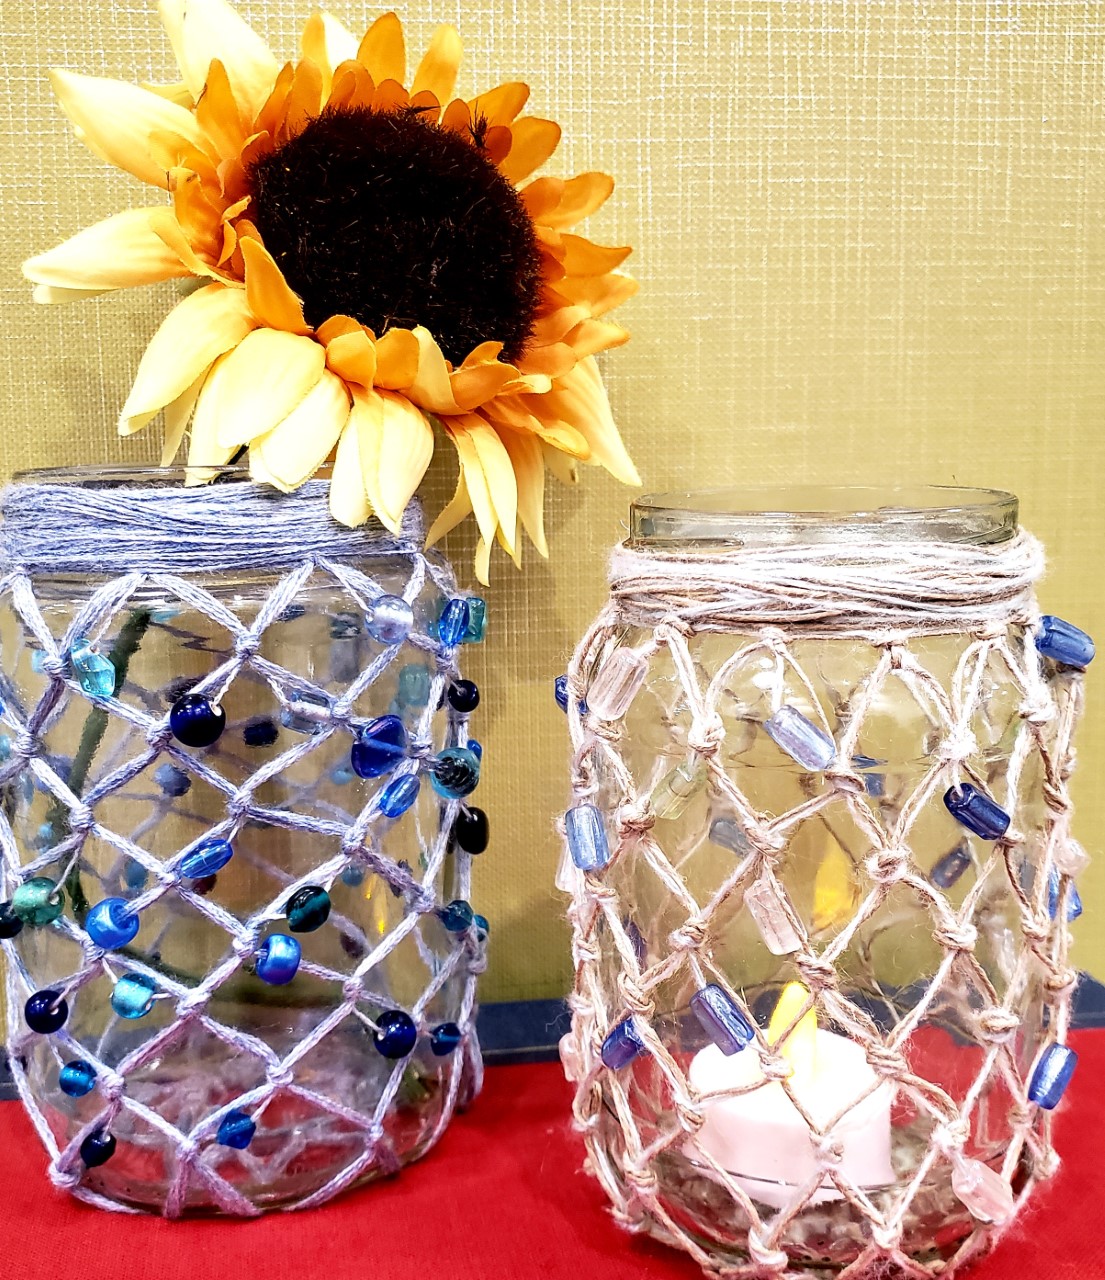 two jars covered in knotted and beaded string/yarn to create a net effect in one is a sunflower in the other is a small candle